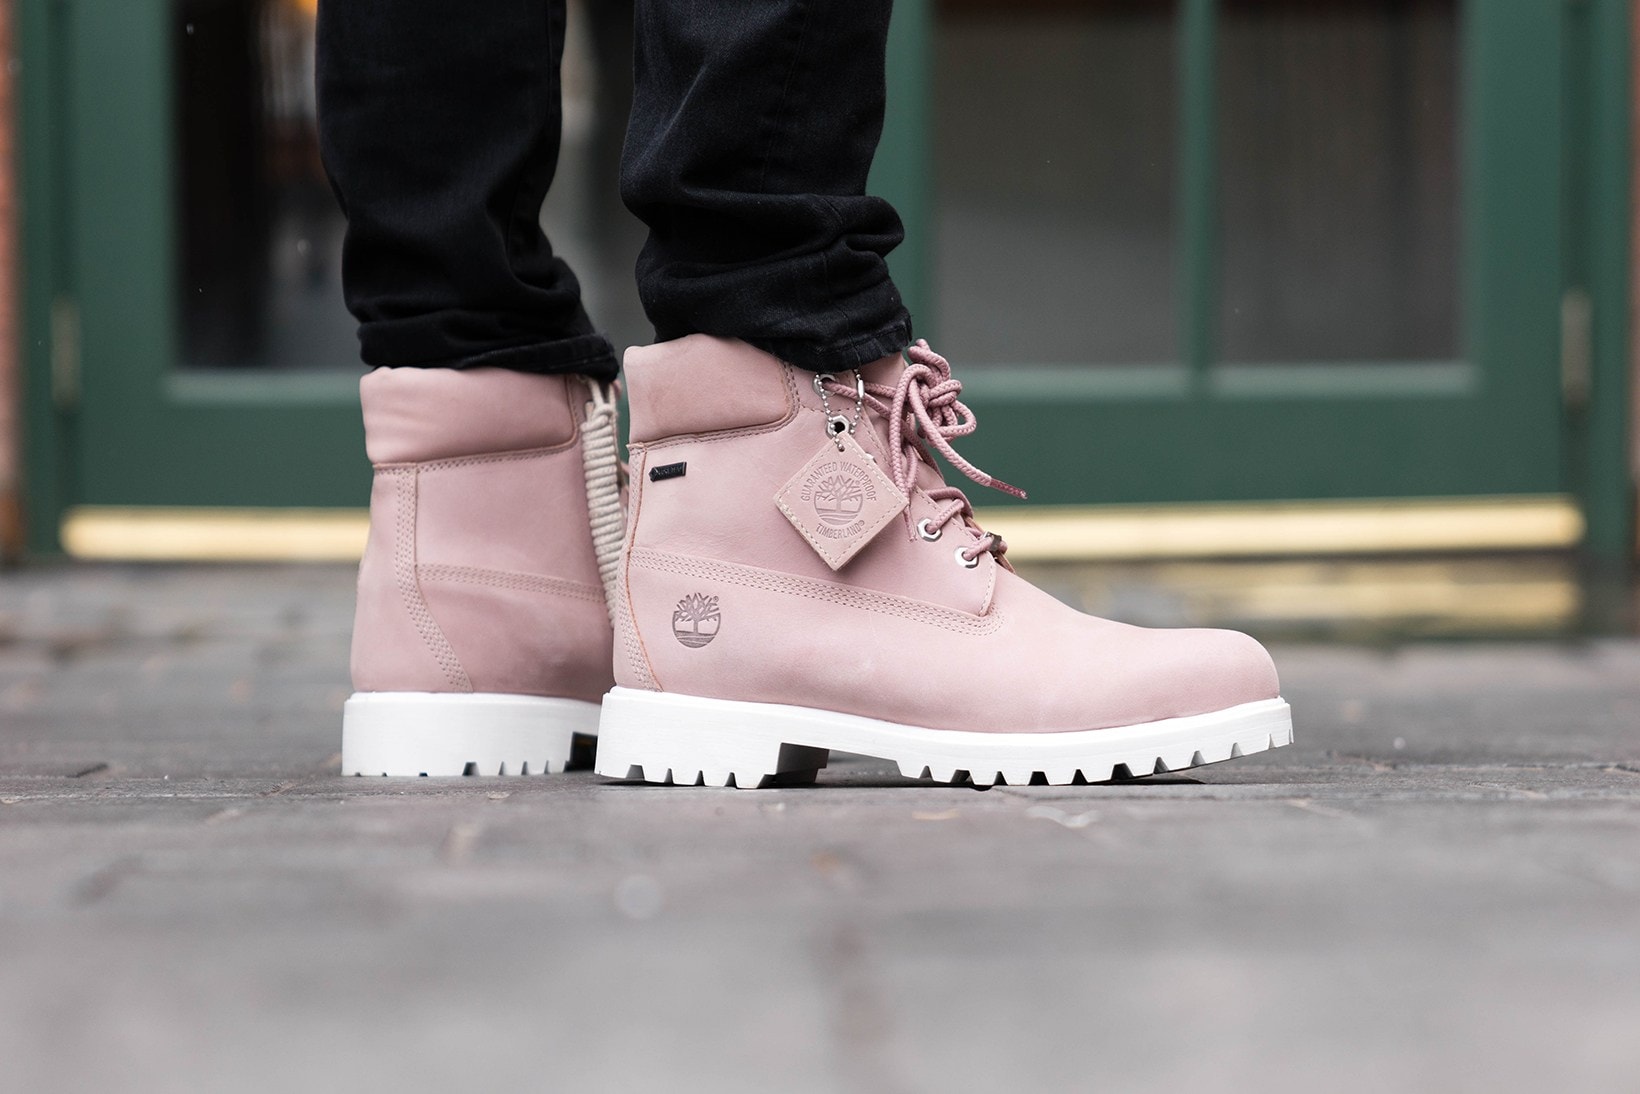 Ronnie Fieg x Timberland 6" Boot "Friends & Family" Edition